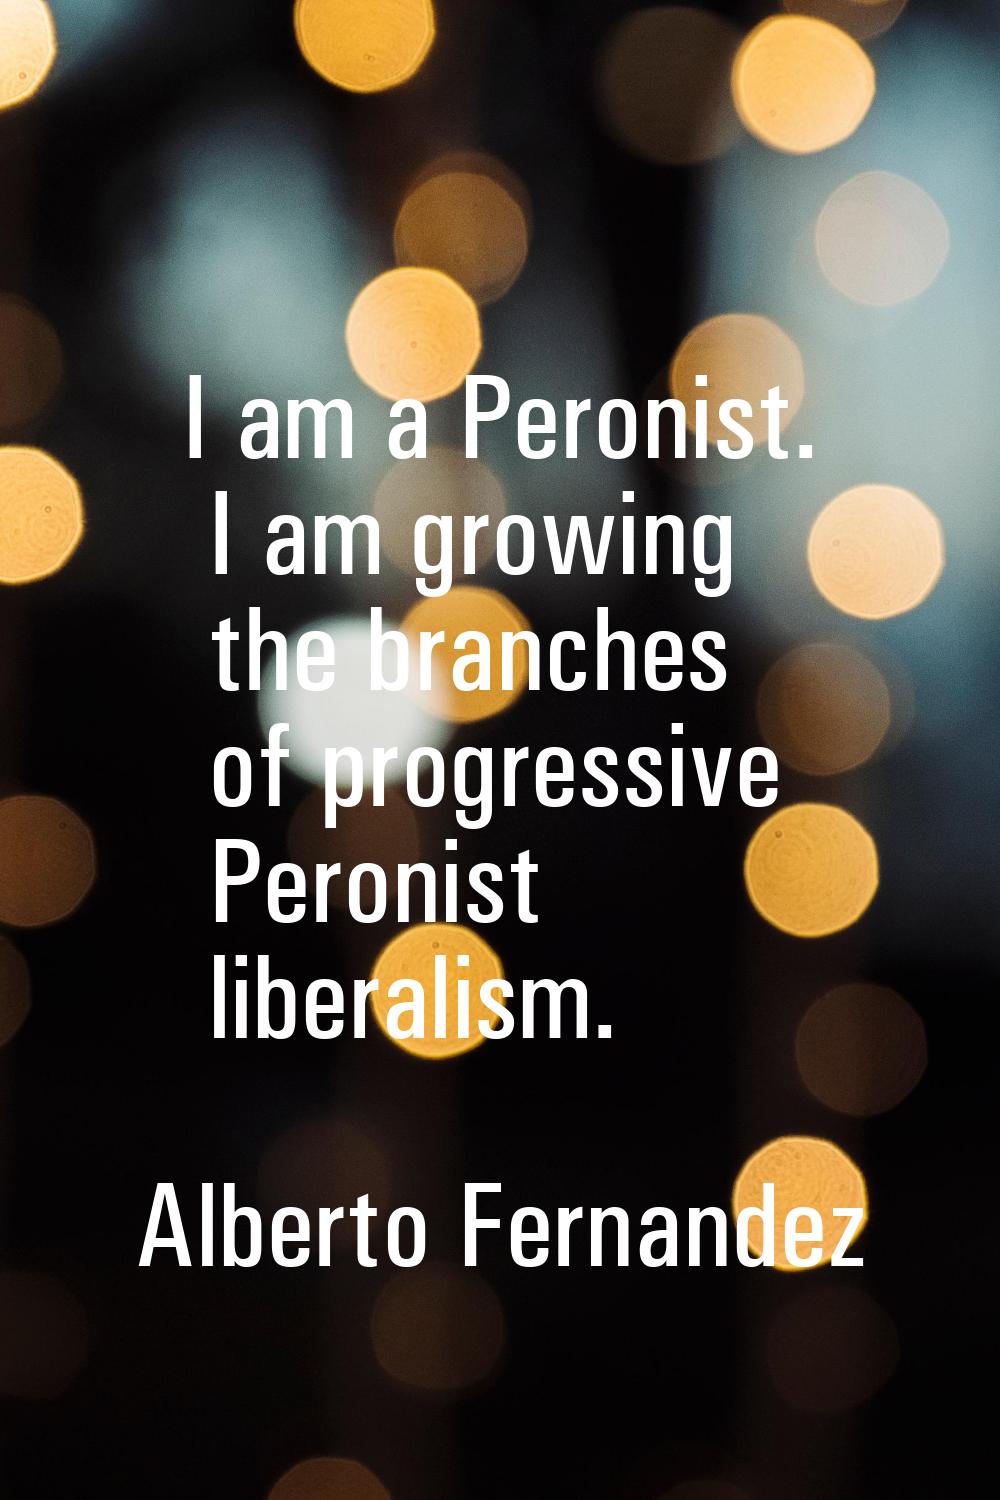 I am a Peronist. I am growing the branches of progressive Peronist liberalism.